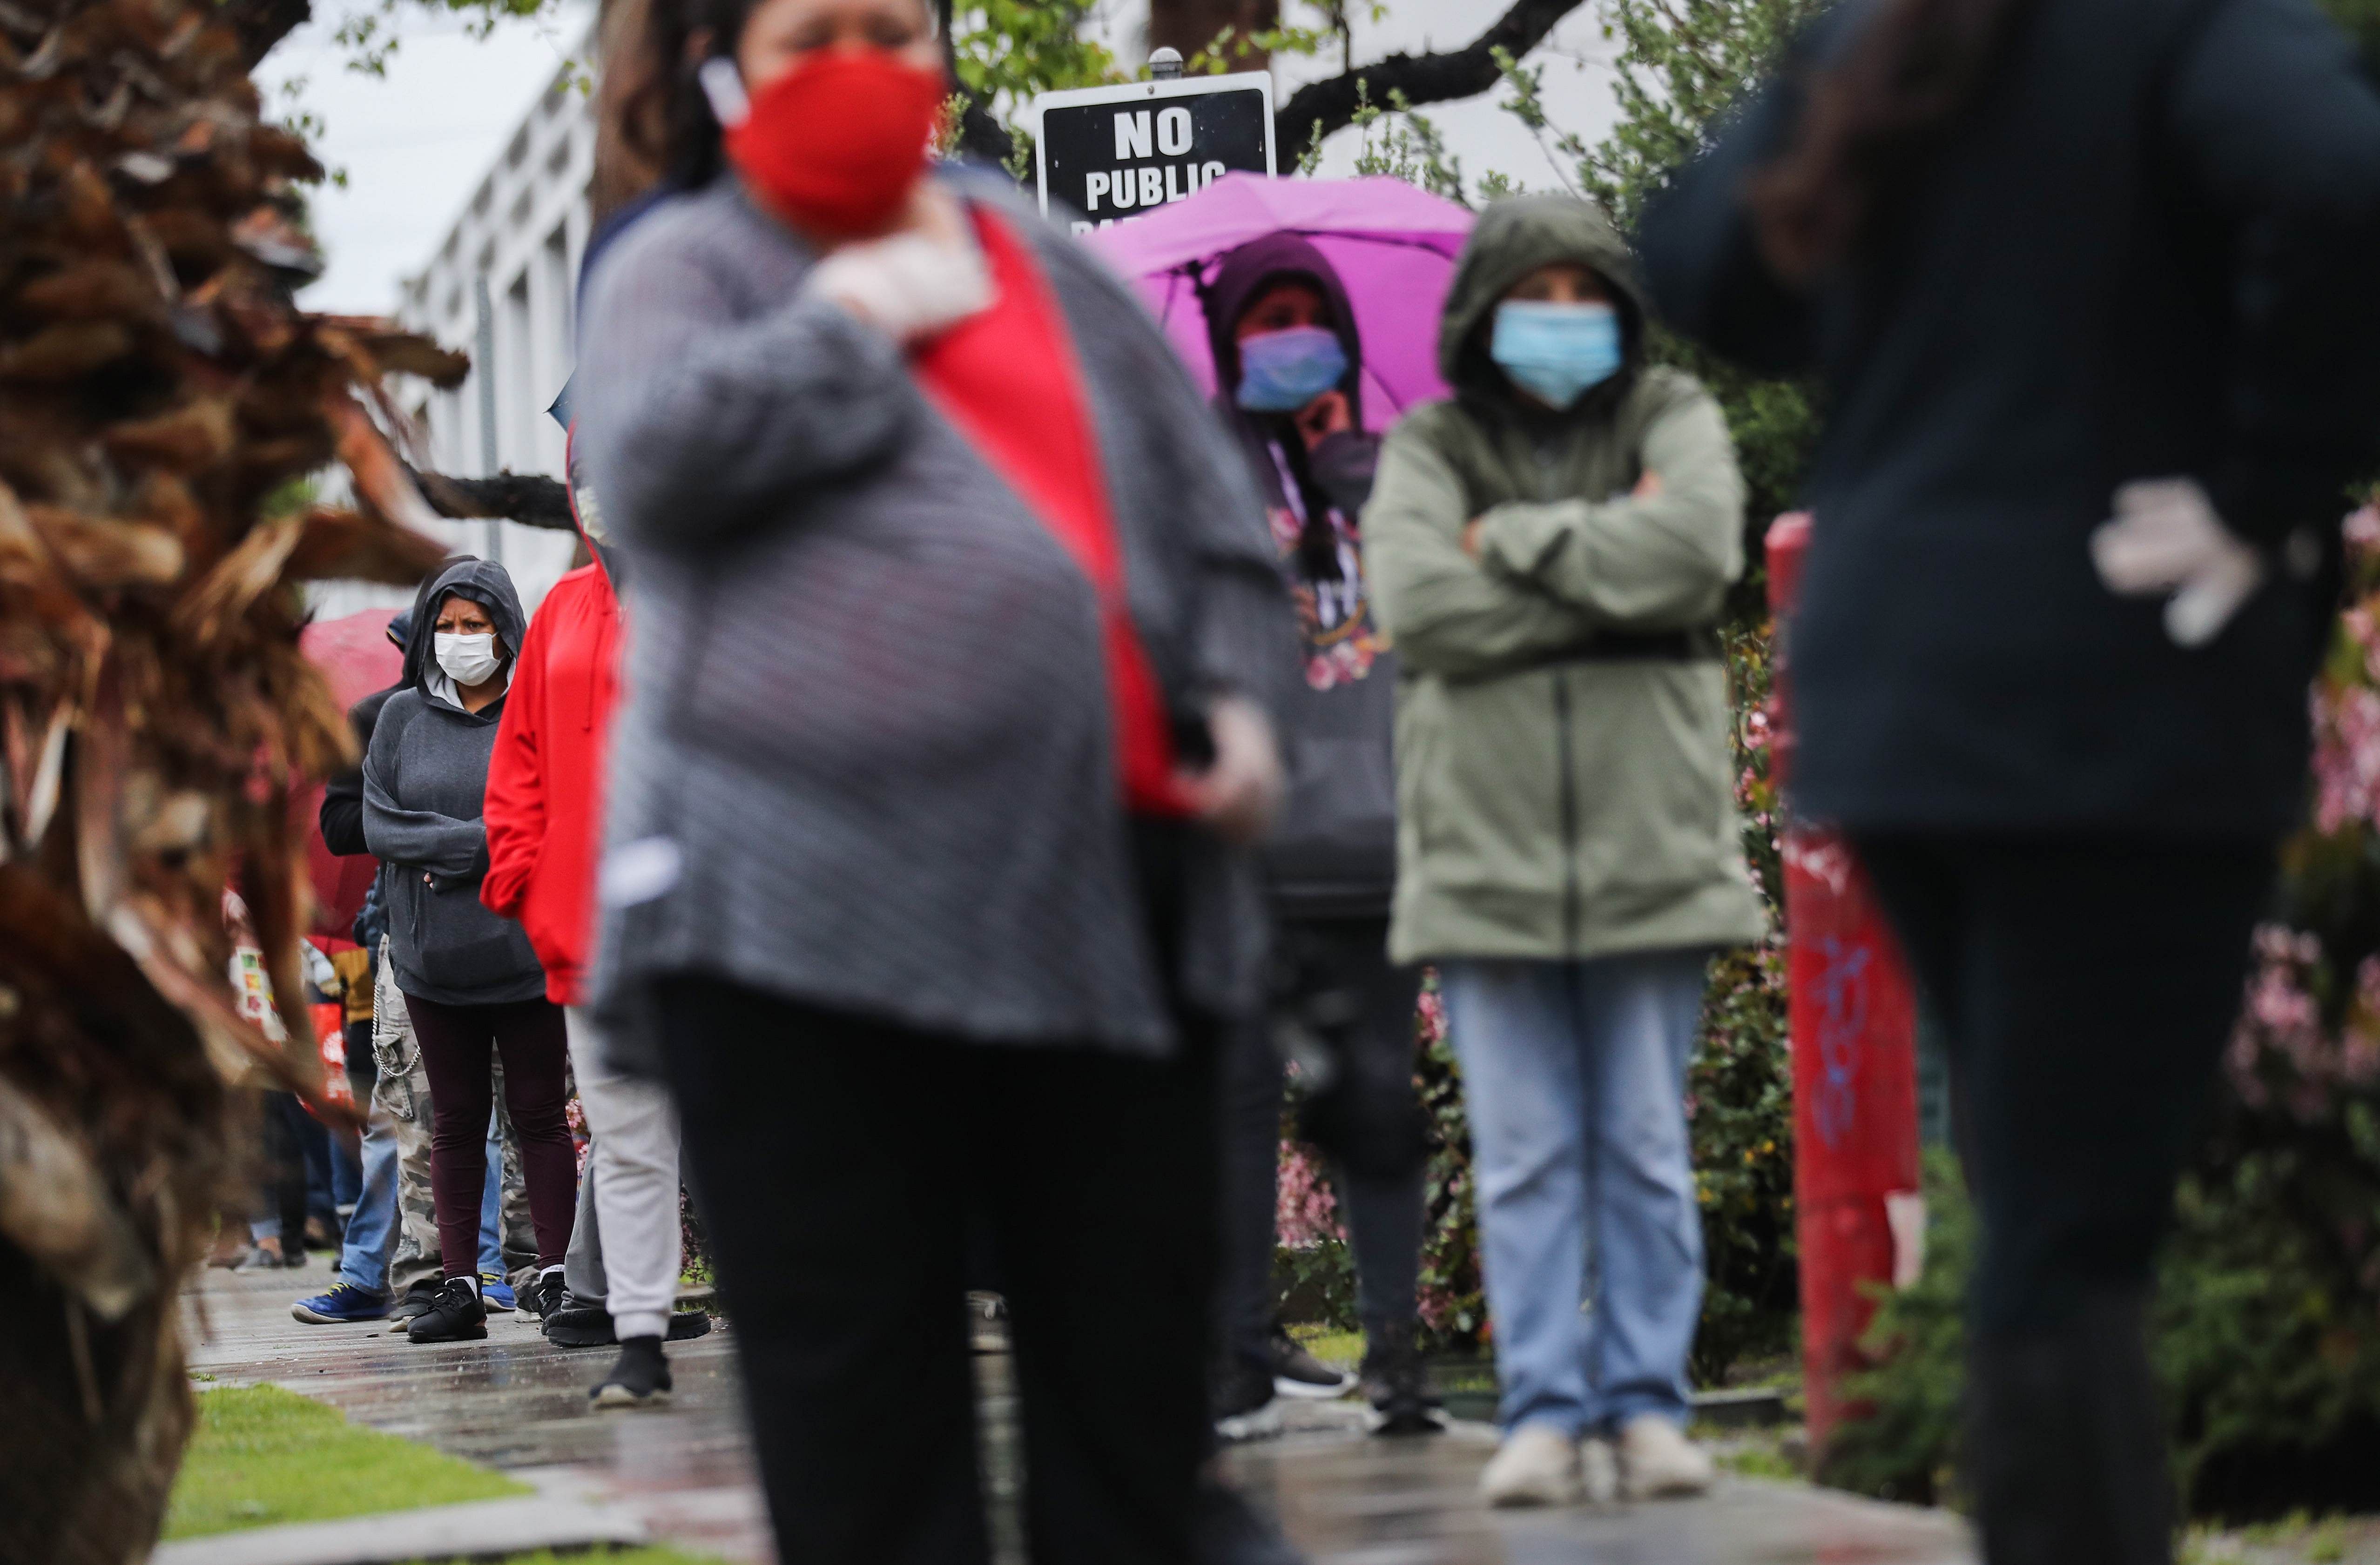 People wait in line at a Los Angeles Regional Food Bank distribution for those in need, as the coronavirus pandemic continues. (AFP Photo)